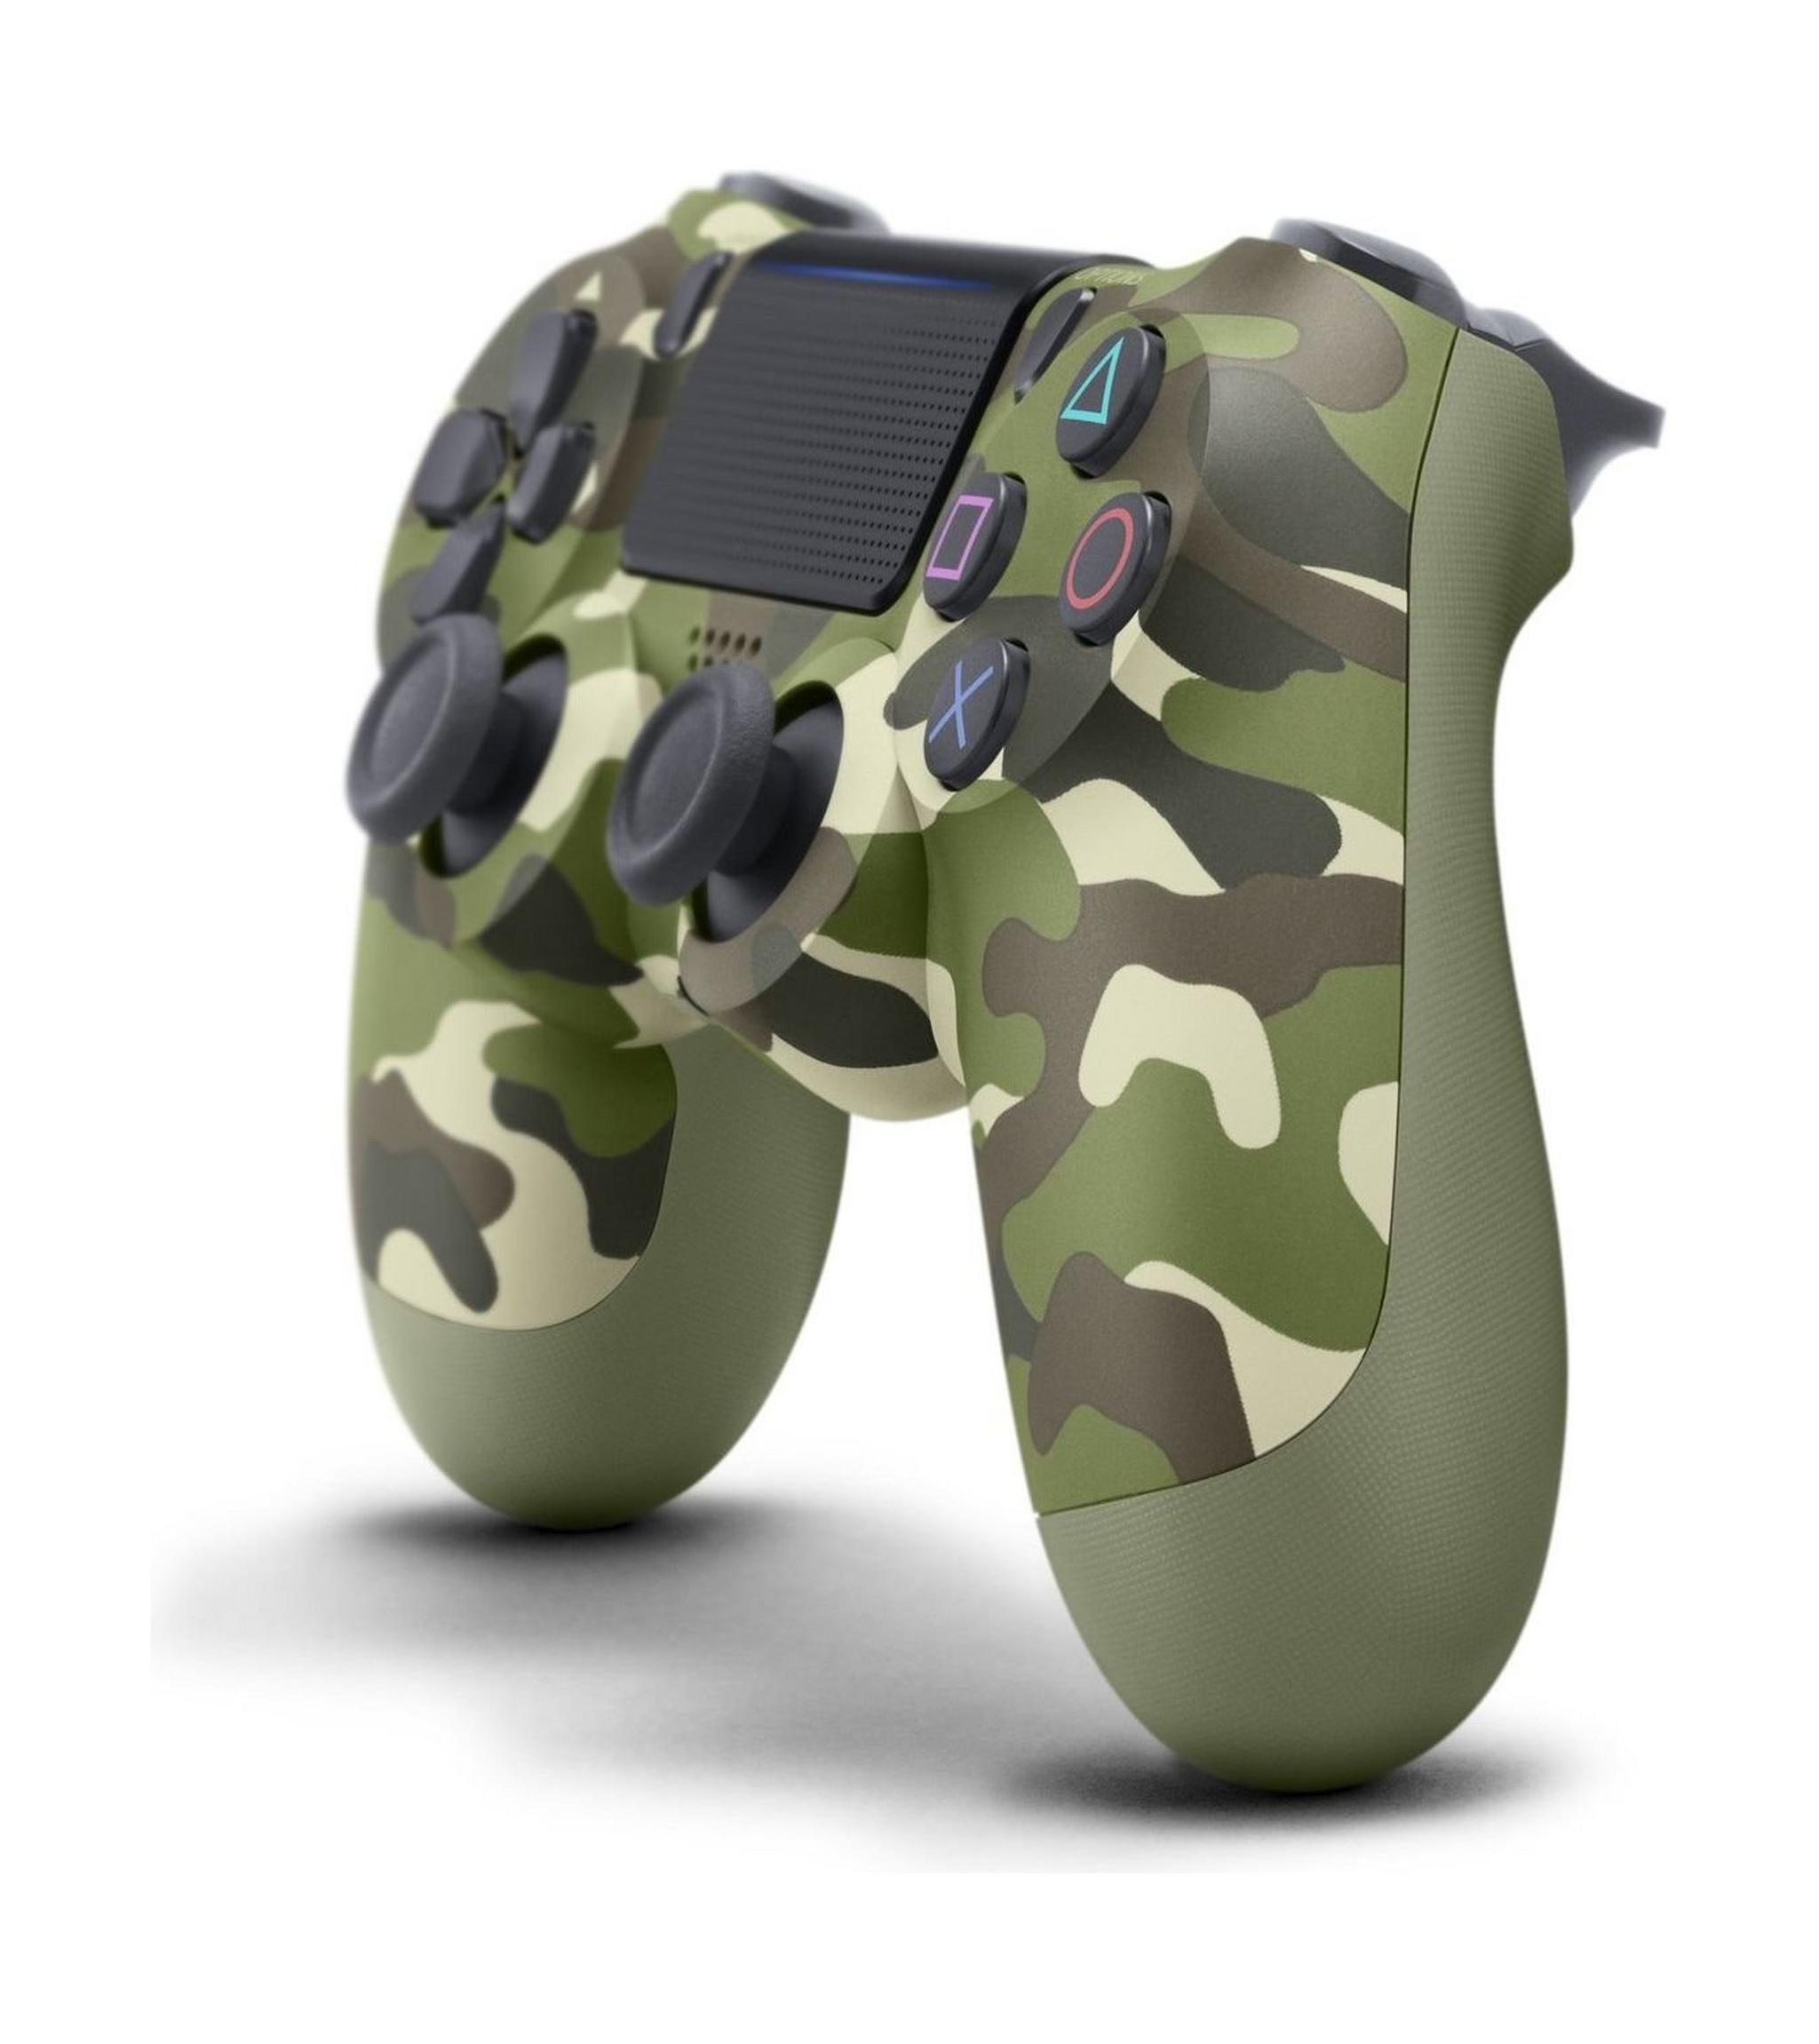 Sony PS4 Controller DualShock 4 Wireless – Green Camouflage